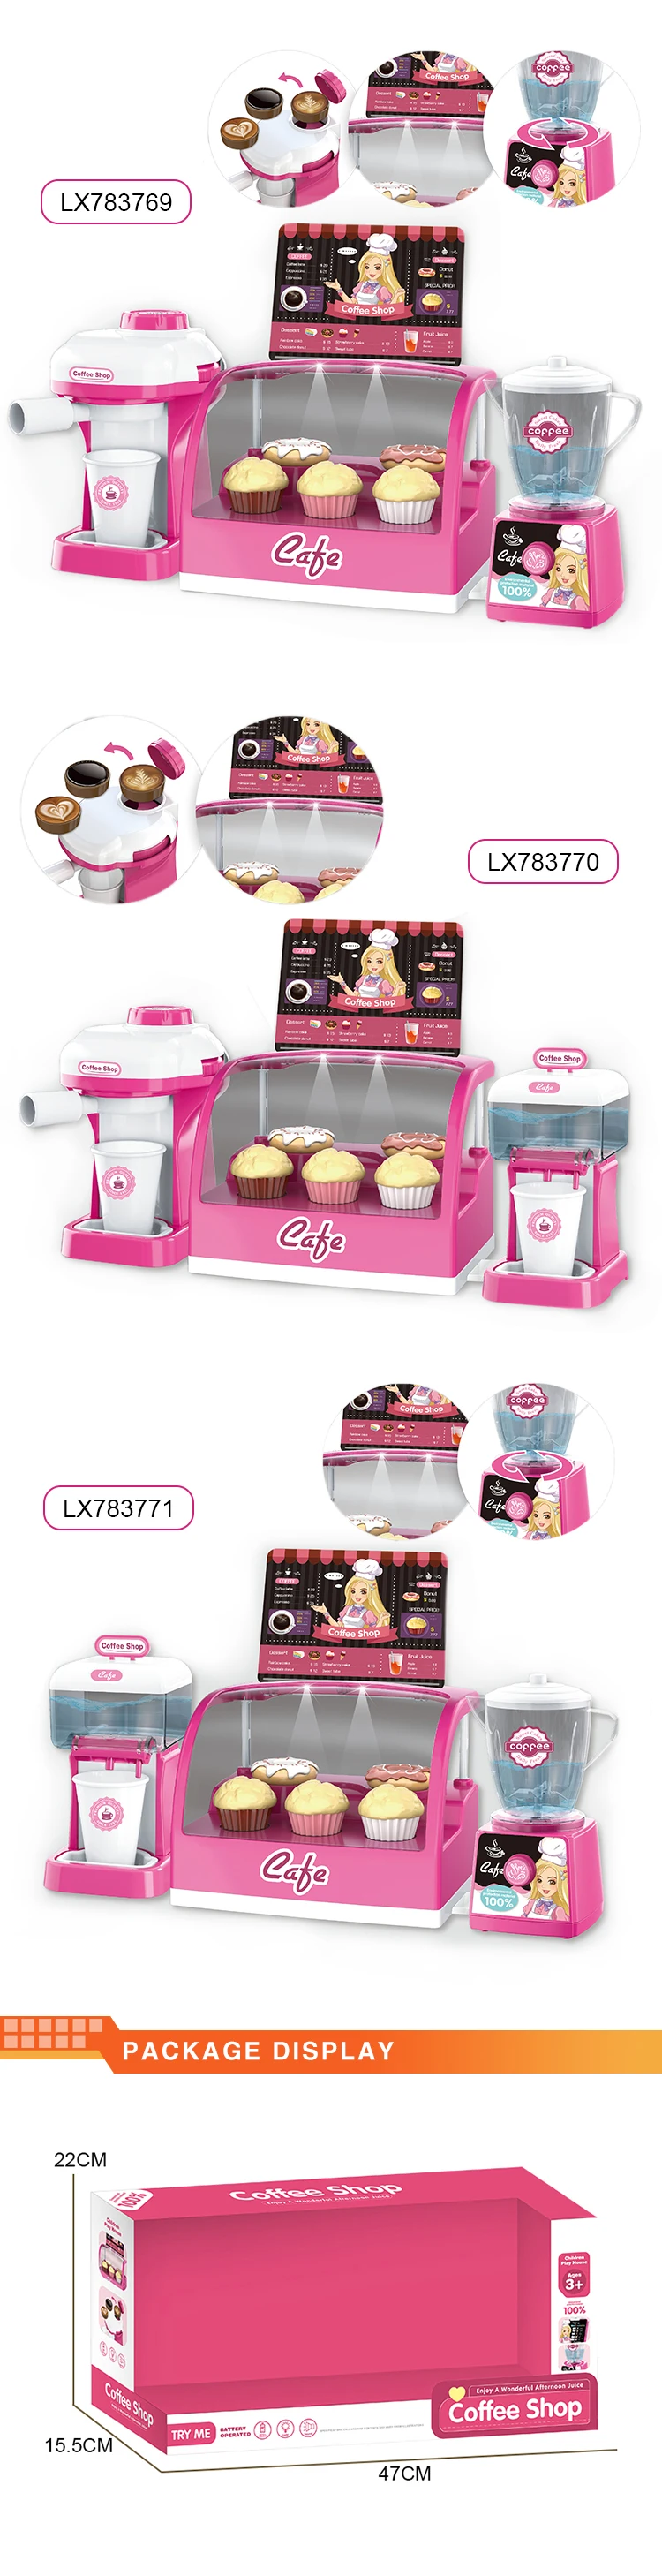 2020 New products Simulation coffee shop toy kitchen sets pretend play with light